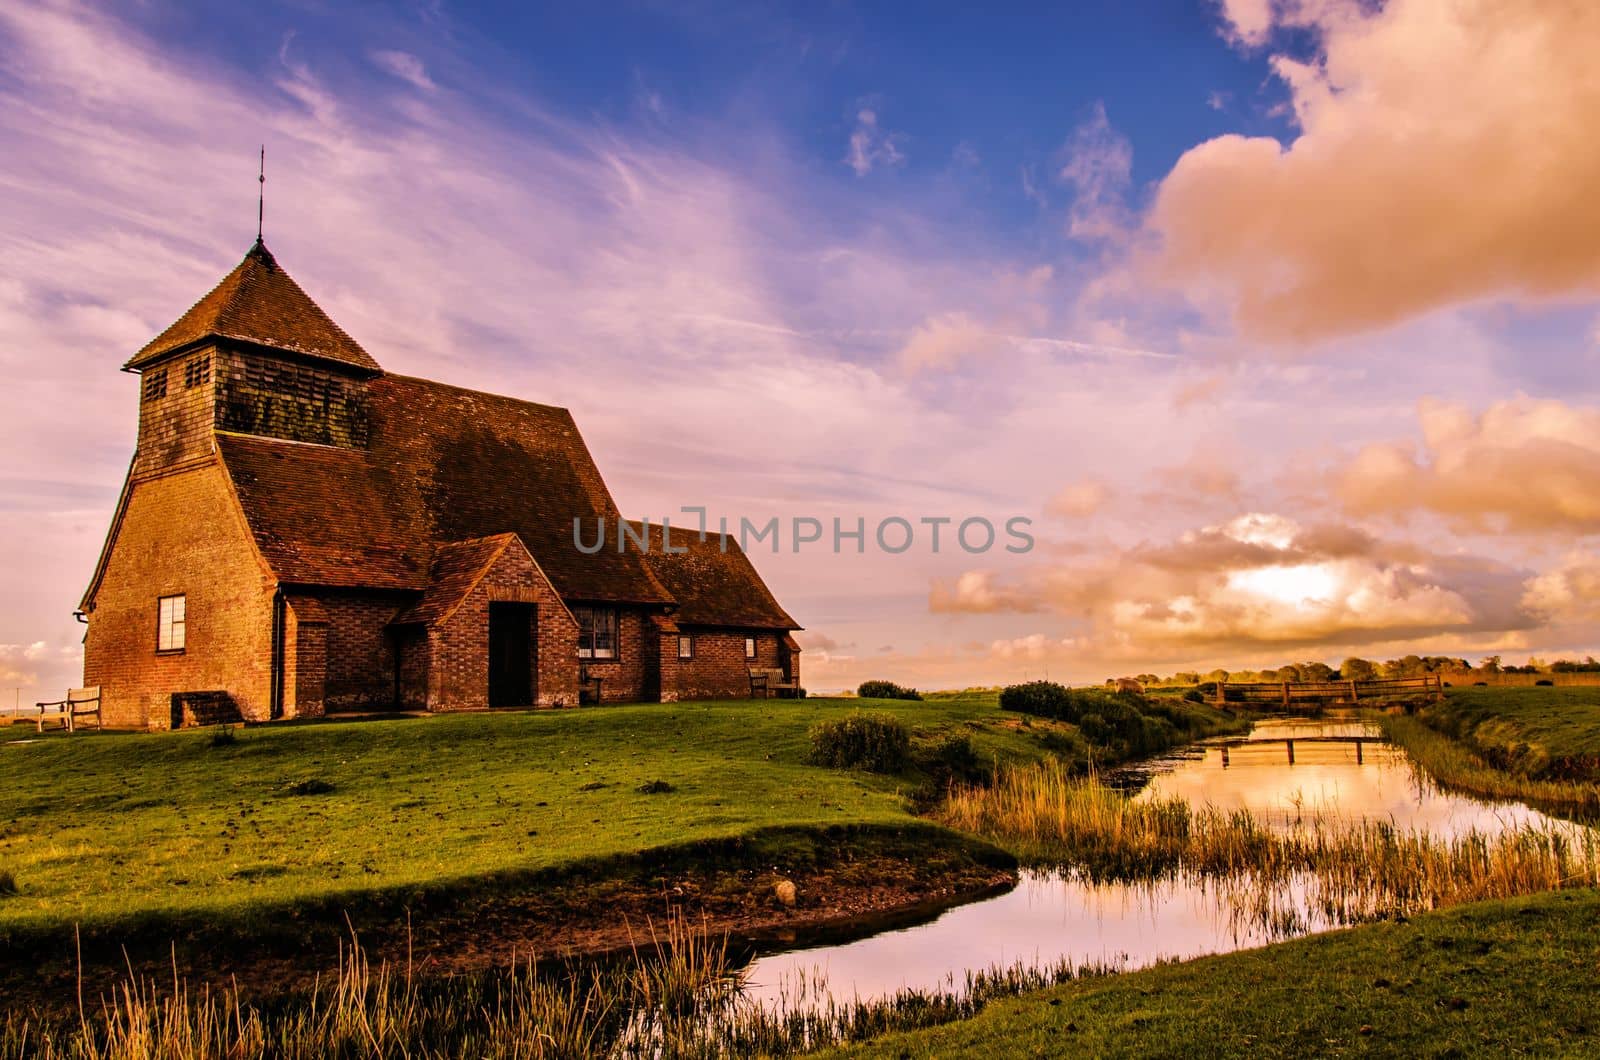 The church of St Thomas a Becket, Fairfield, is a rare example of a small medieval church which has managed to survive without an immediate village to sustain it. It stands remote and isolated on a man-made hillock above the Wallend Marsh, part of Romney Marsh, Kent, UK.

photograph © Jeremy Sage